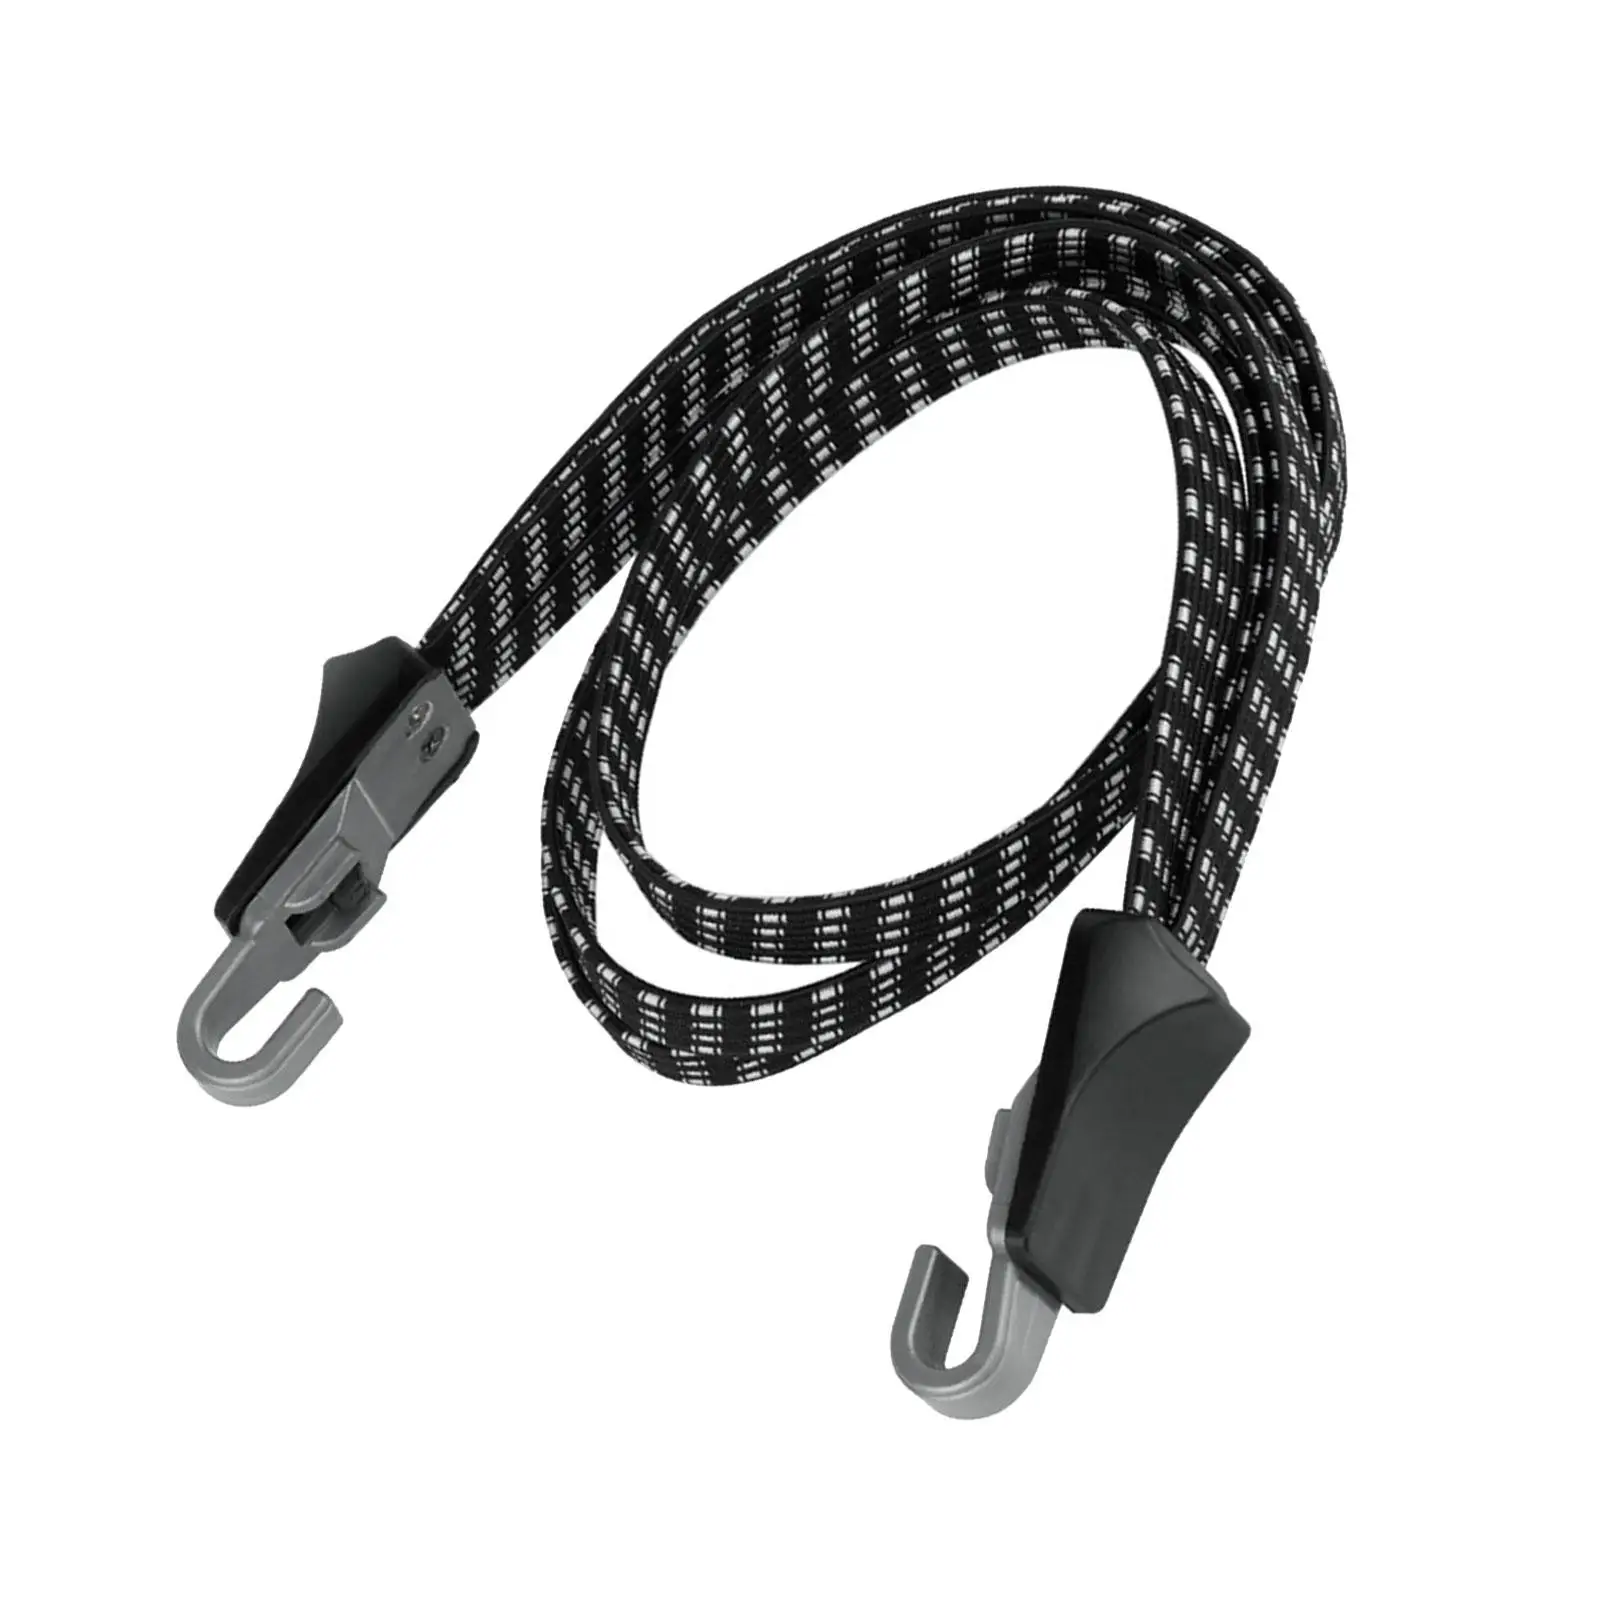 Elastic Straps Motorcycle Luggage Strap Bike Accessories Bike Binding Cord Bungee Cords for Riding Hiking Fishing Travel Outdoor